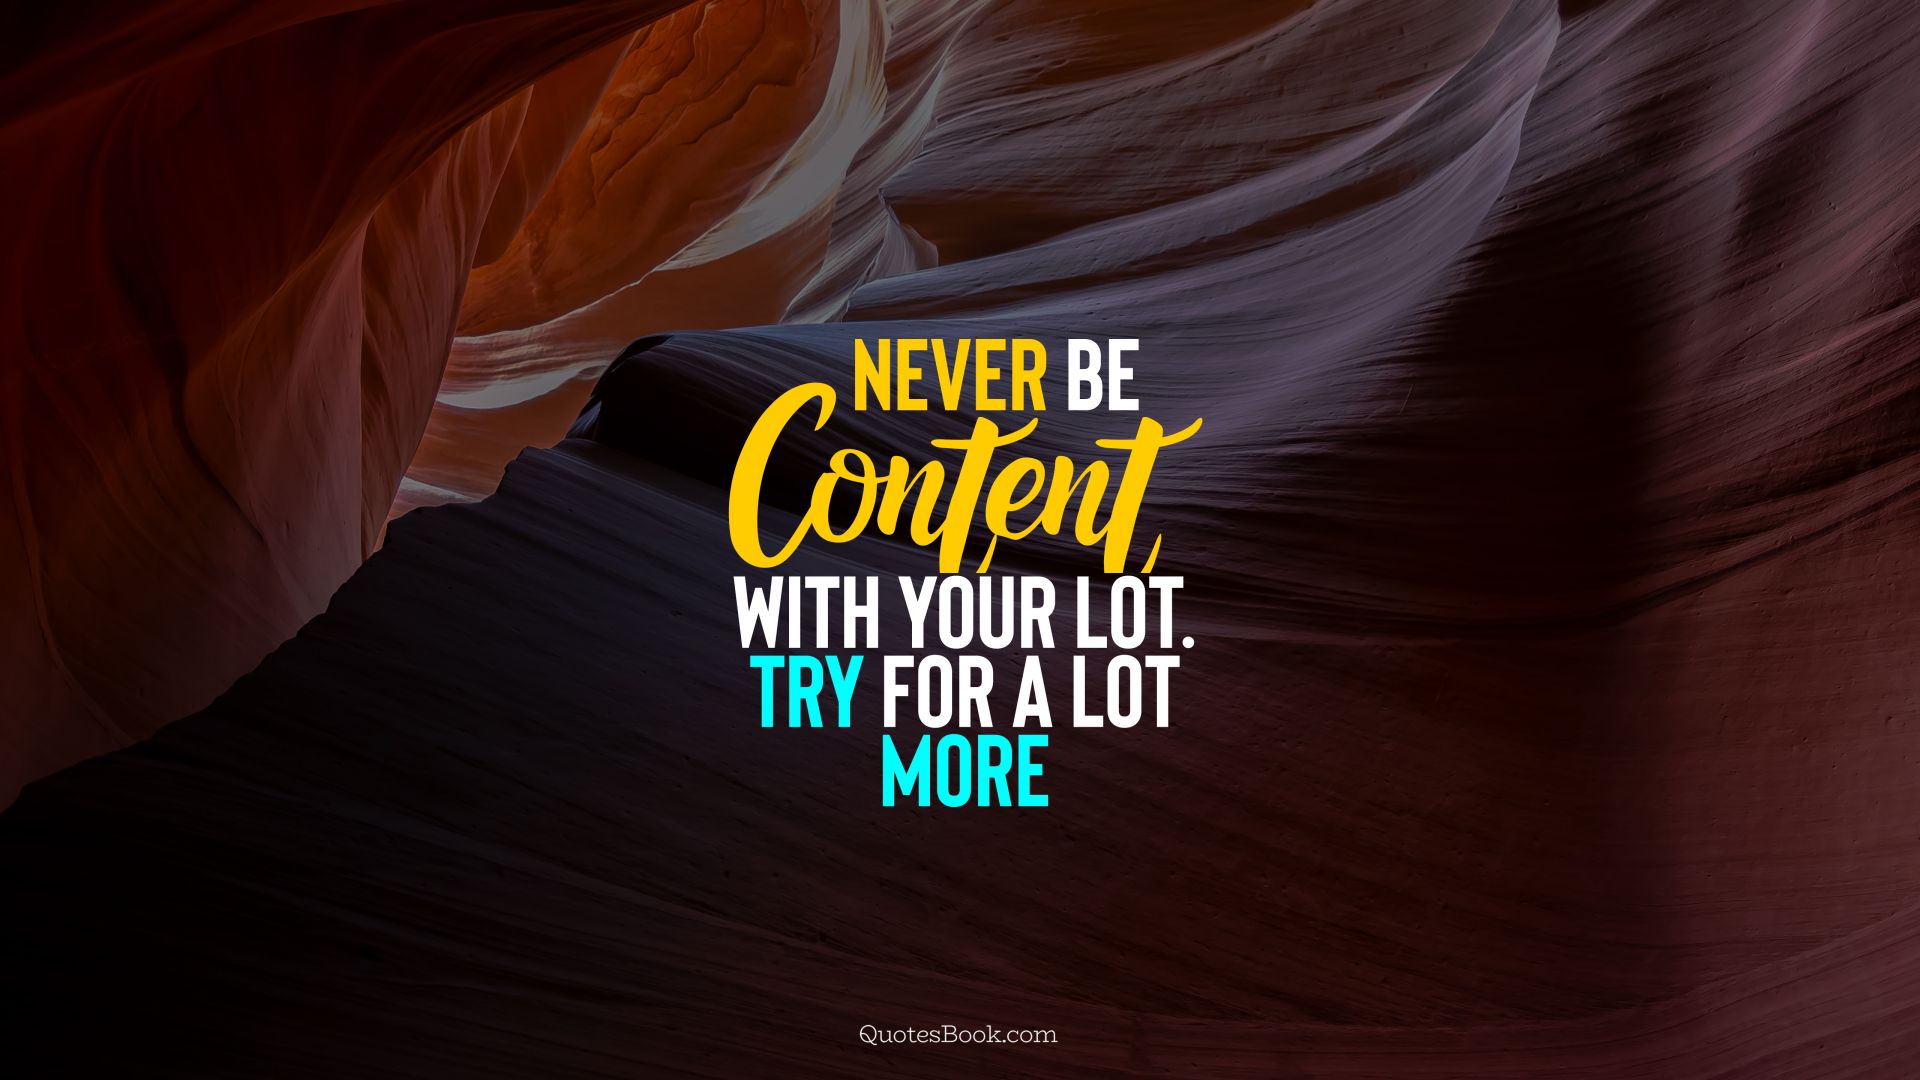 Never be content with your lot. Try for a lot more